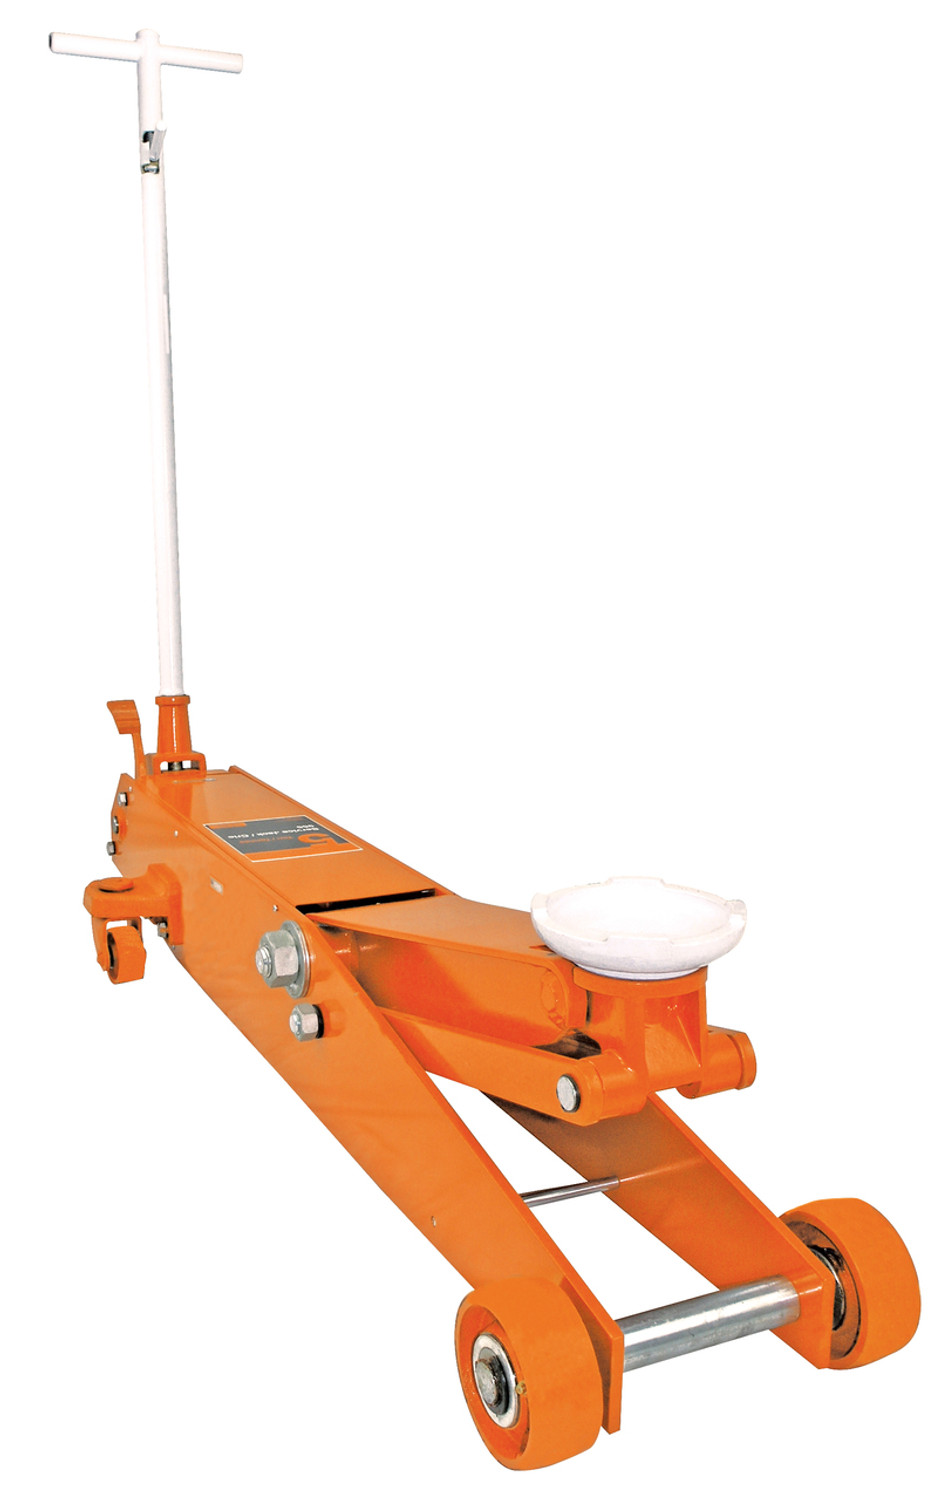 STRONGARM 955 5Ton Long Chassis Manual Jack | SafetyWear.ca